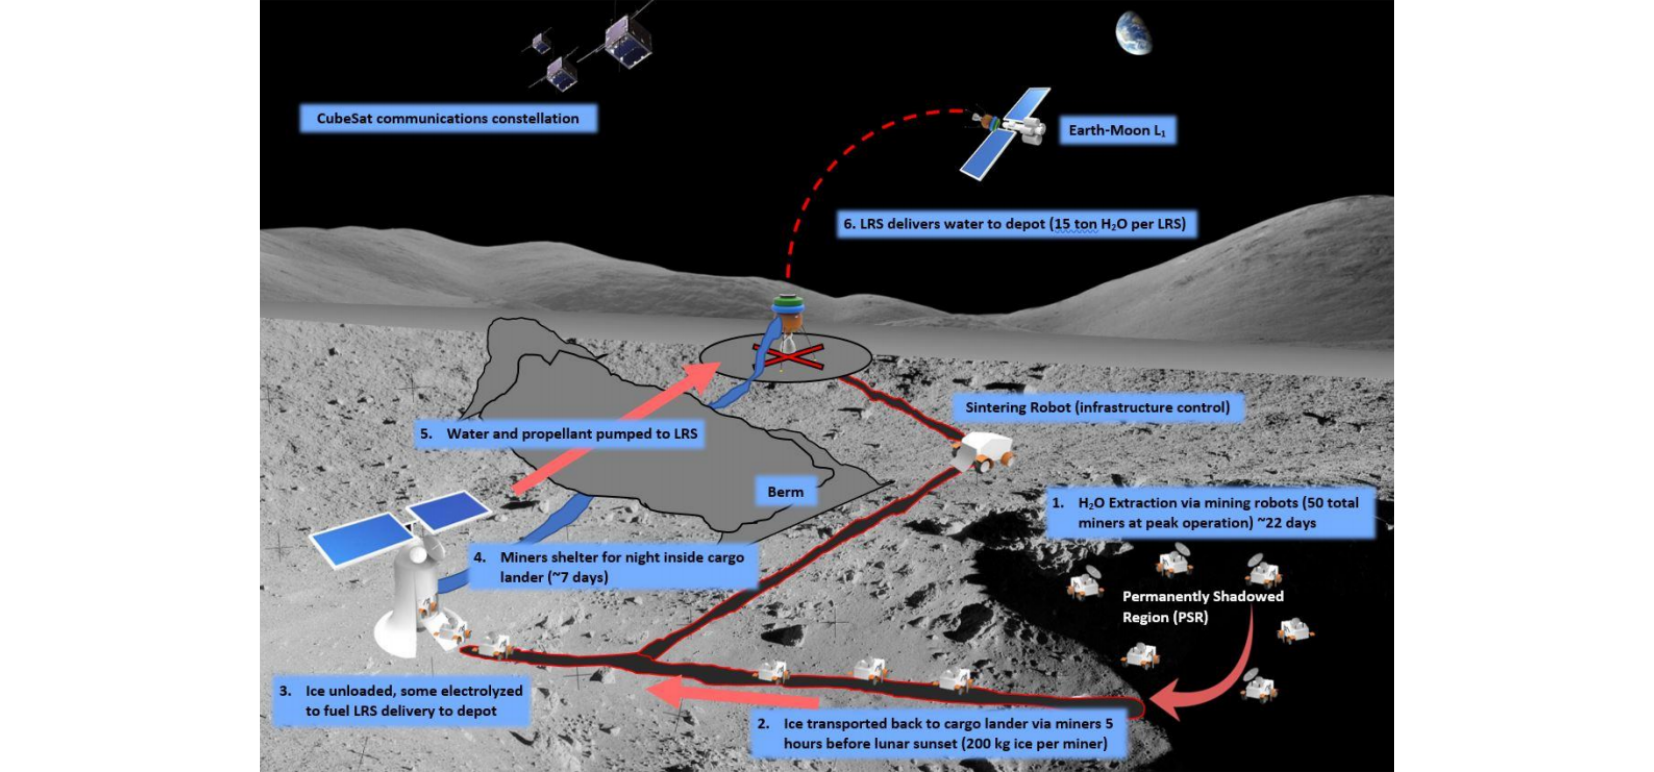 Concept of operations for Lunar surface systems